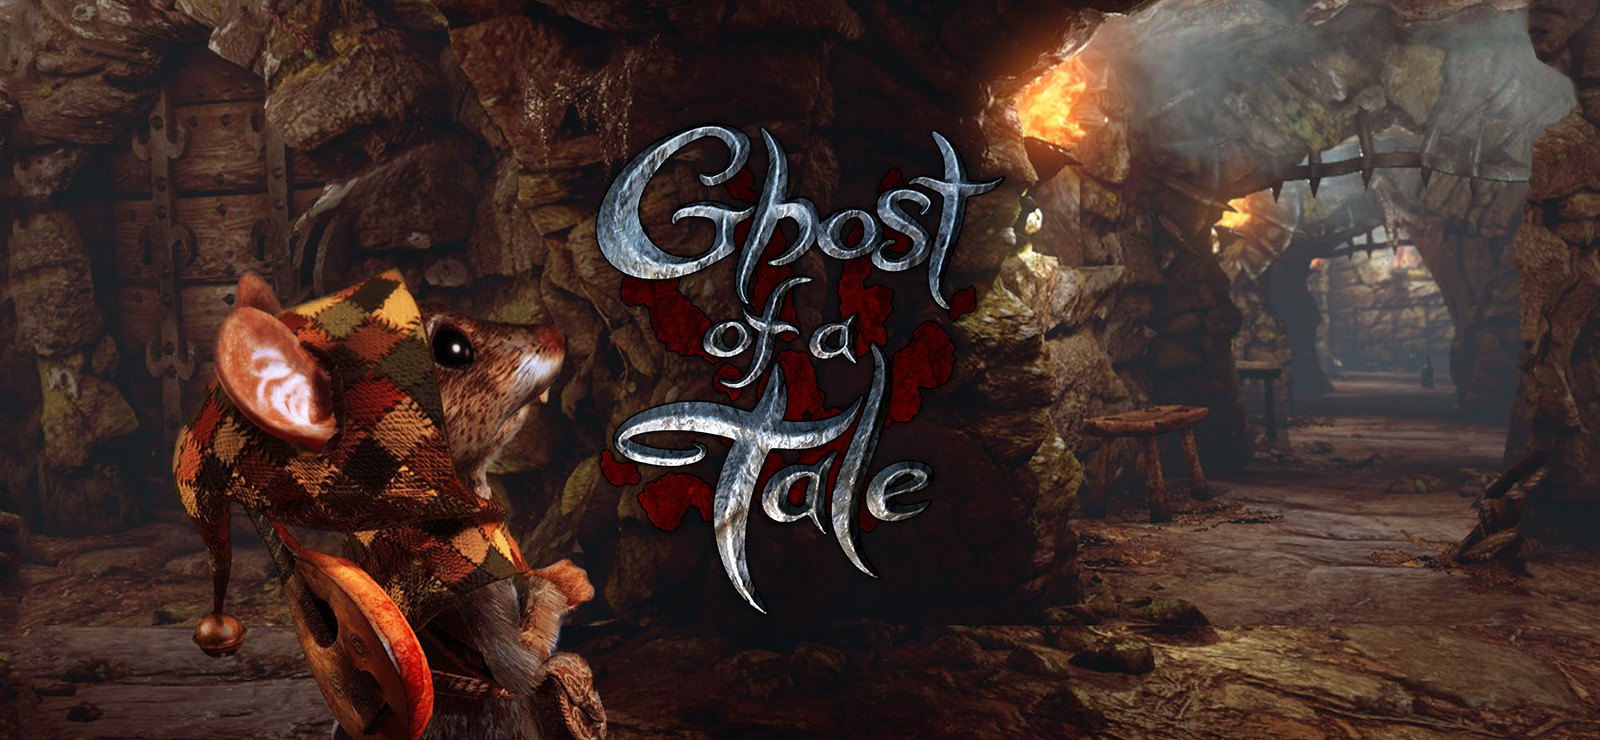 

Ghost of a Tale is an action-RPG game in which you play as Tilo, a mouse and minstrel c